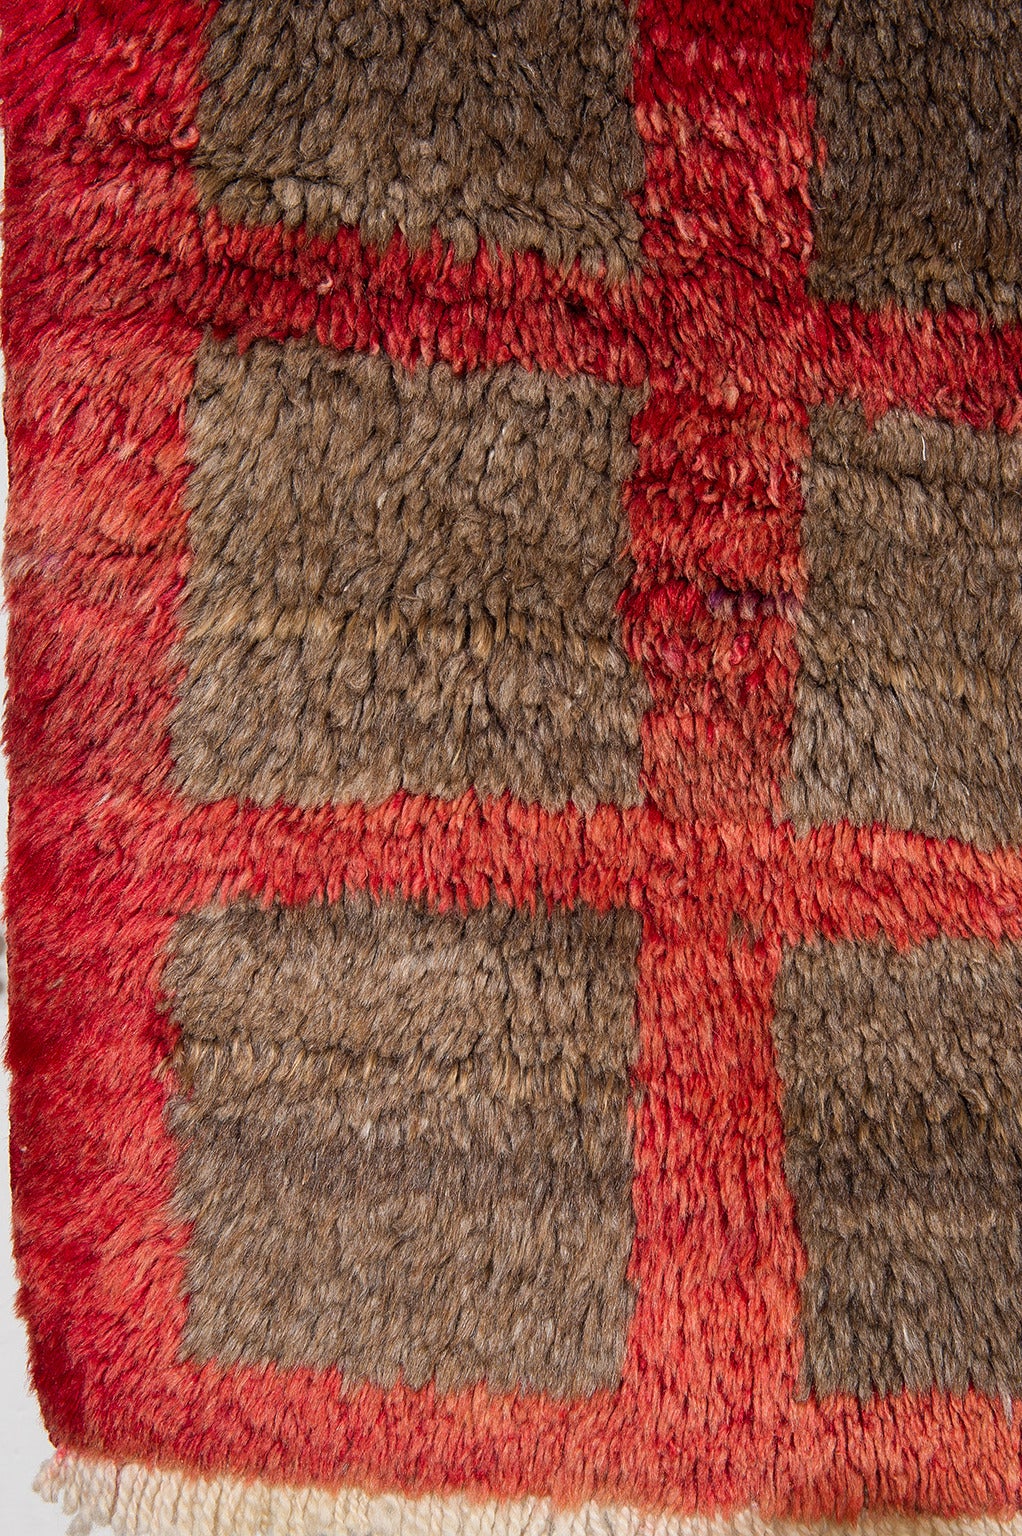 Vintage Tulu (Turkey) signed E (initial of the name of the weaver), with modern taste, character and personality - The hazel color is the natural wool dyed with walnut husk, all enclosed in a bright red.
nr. 519.